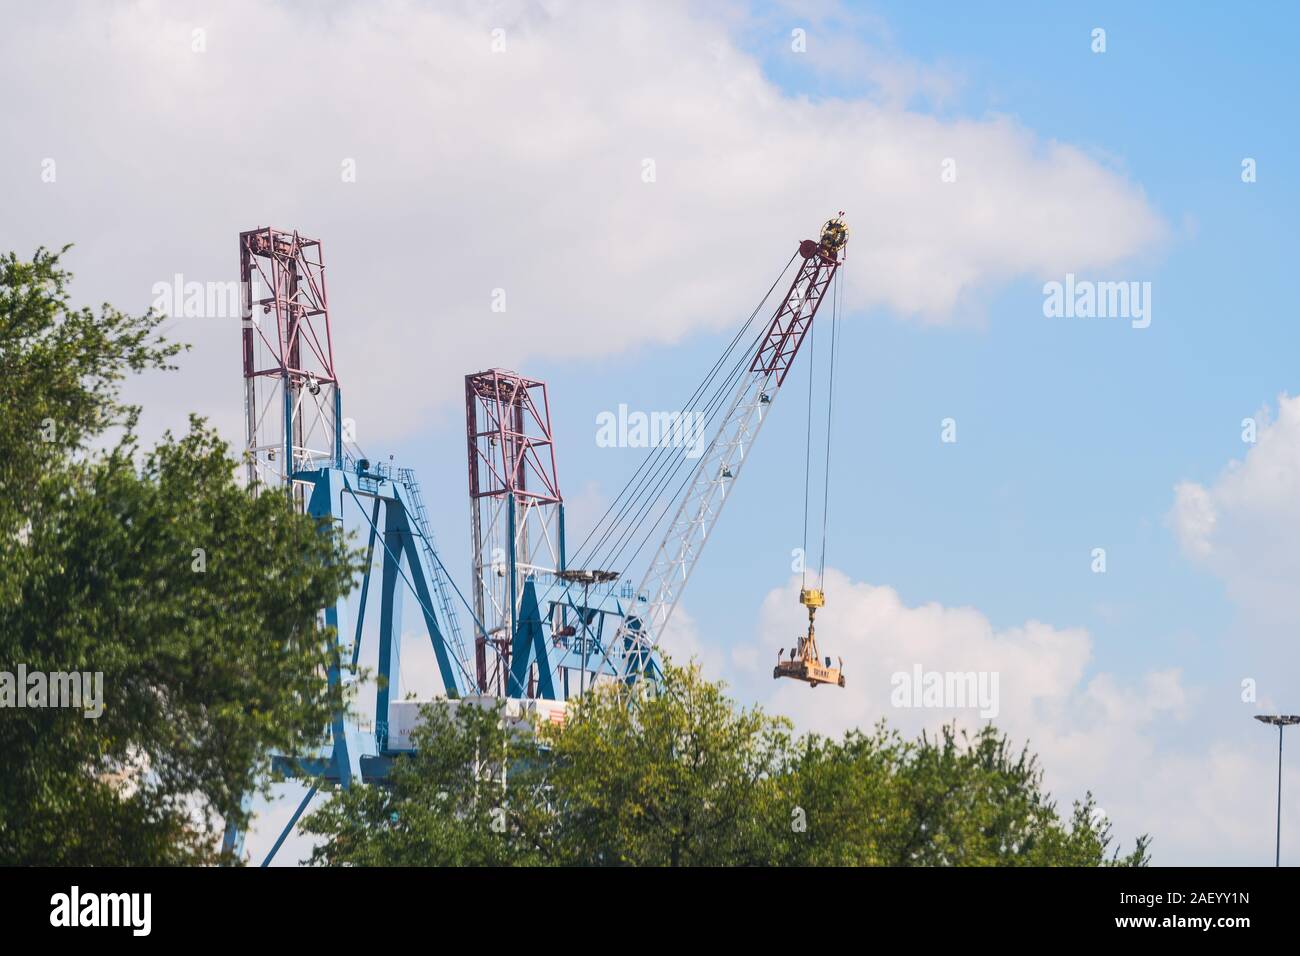 Mobile, USA - April 21, 2018: Industrial factory in Alabama with warehouse business shipping containers with cranes isolated against sky Stock Photo